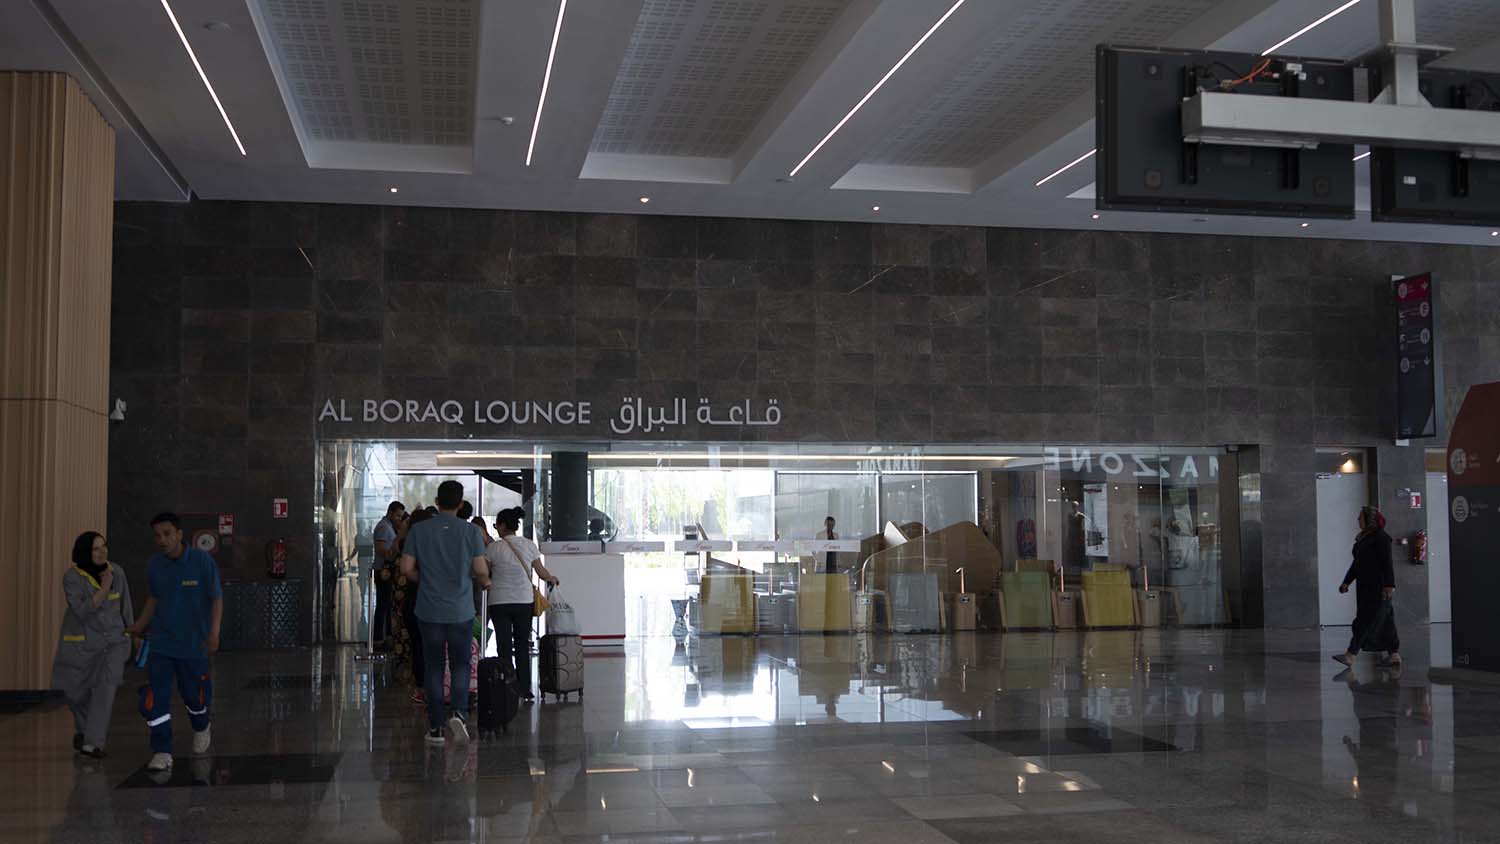 <p>View of Al Boraq Lounge from inside the lobby</p>